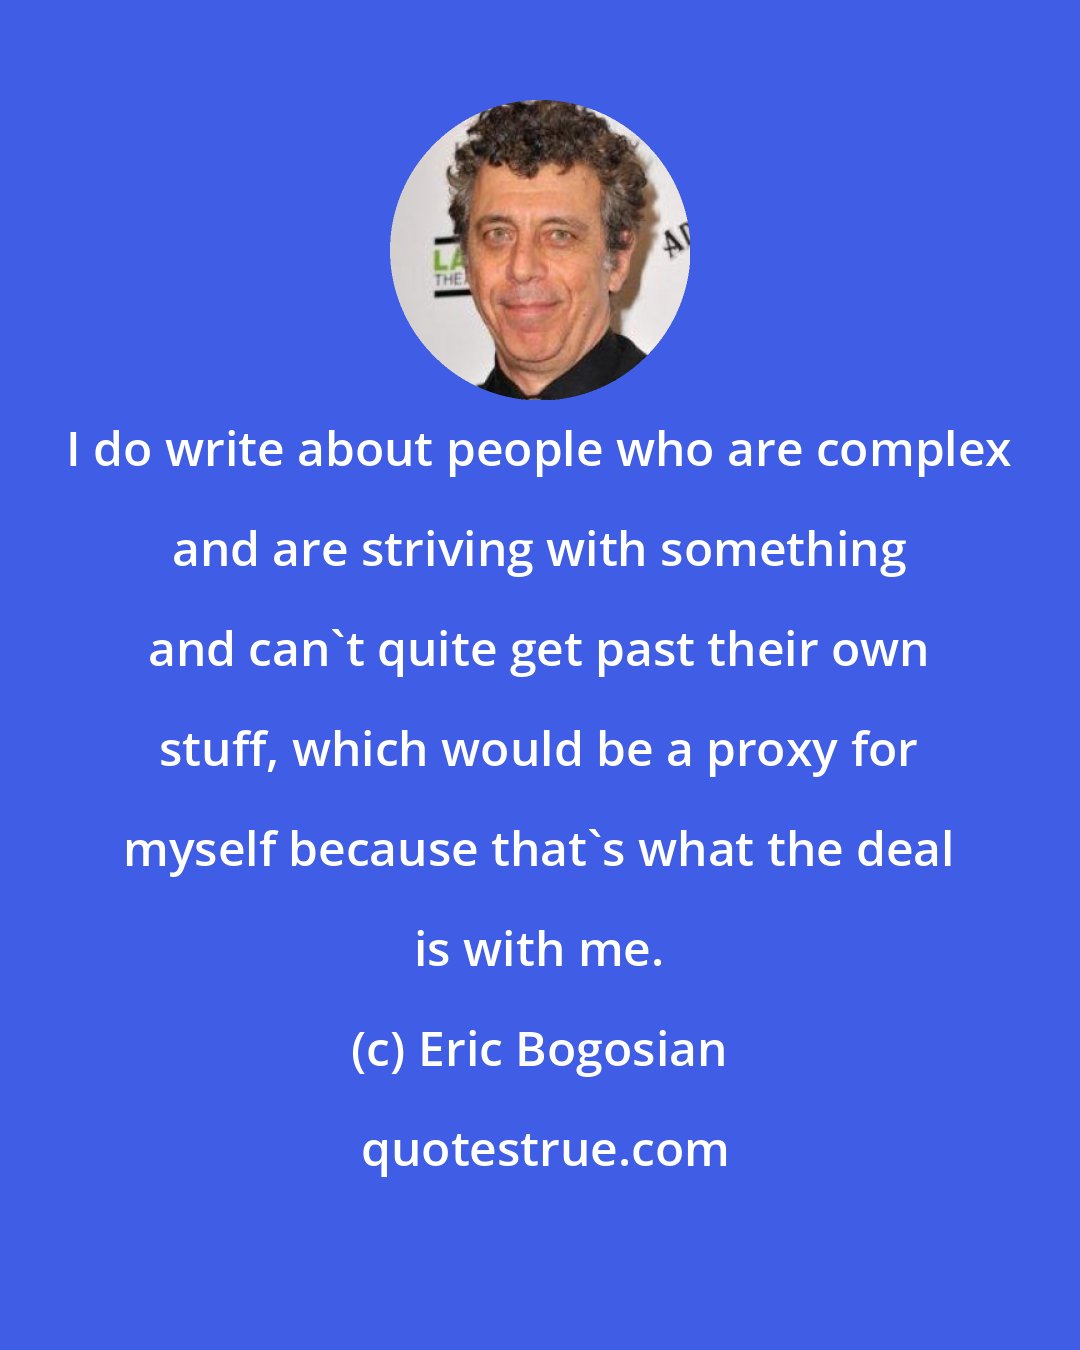 Eric Bogosian: I do write about people who are complex and are striving with something and can't quite get past their own stuff, which would be a proxy for myself because that's what the deal is with me.